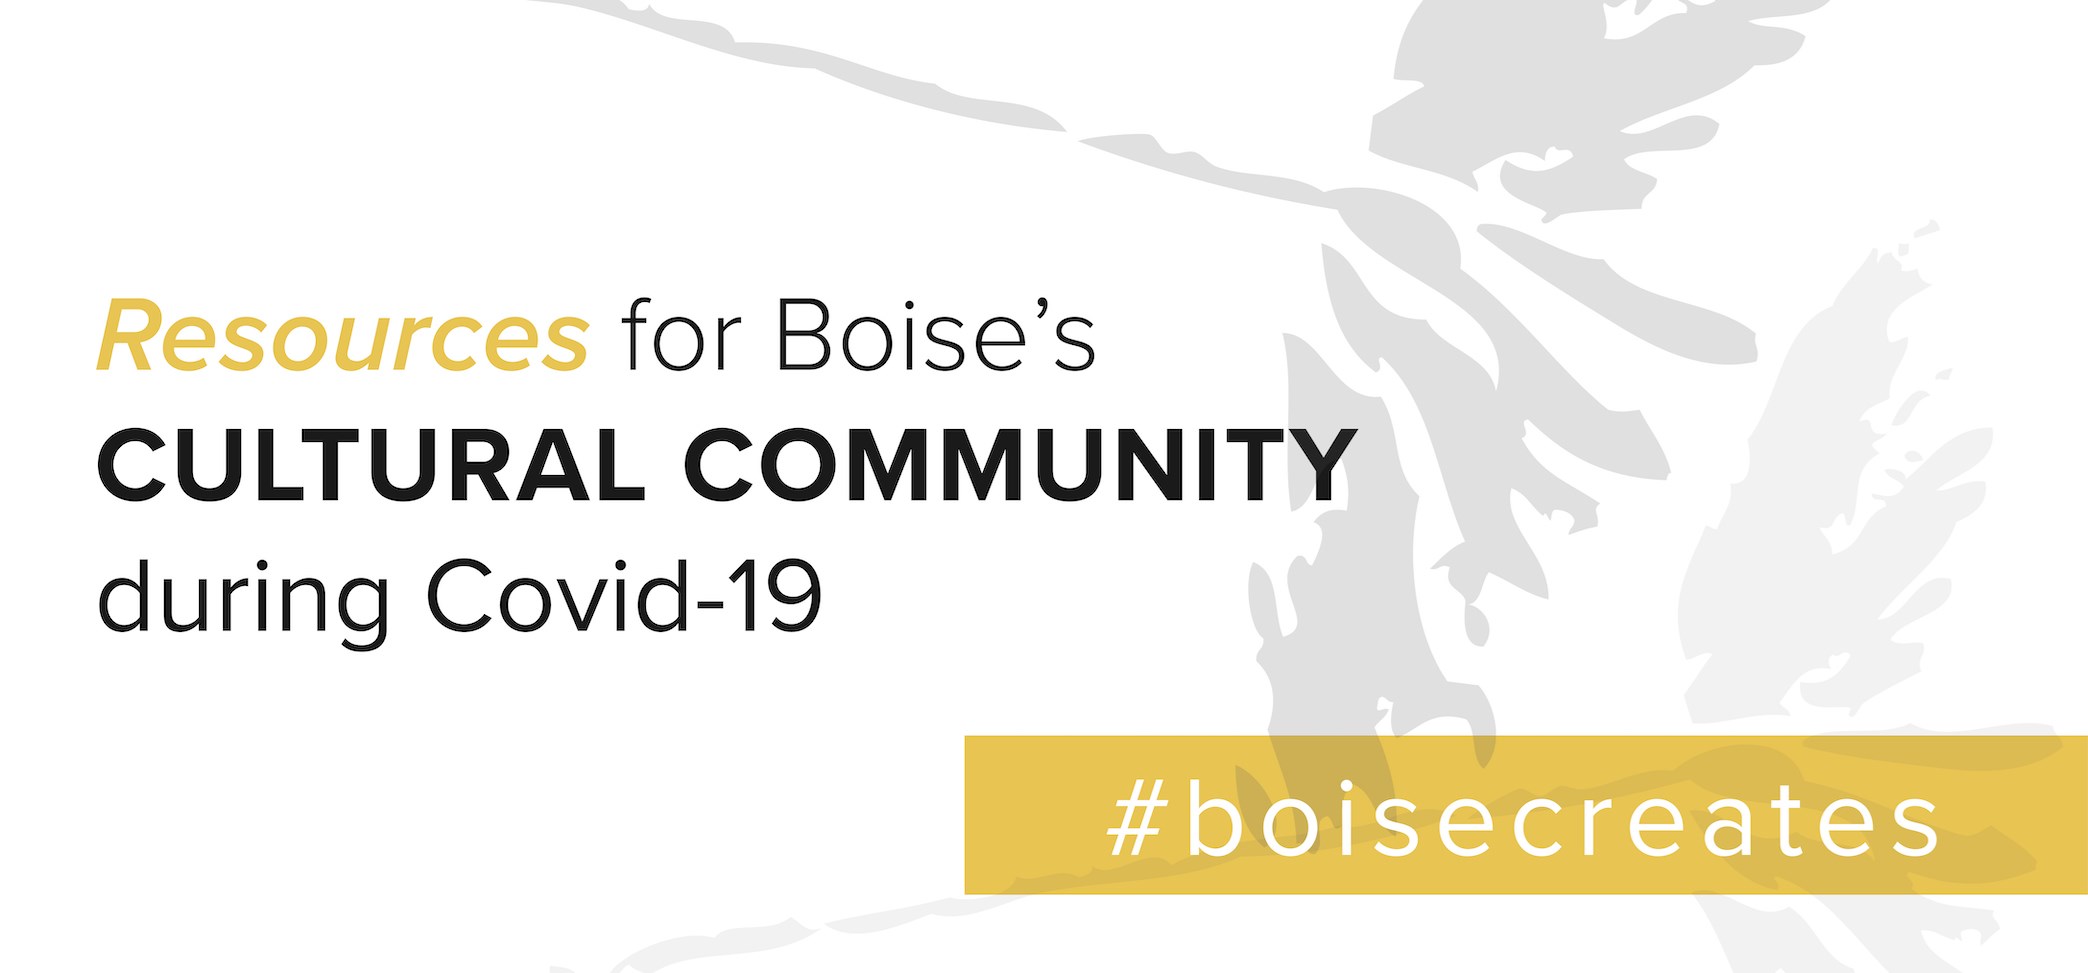 Resources for Boise's Cultural Community during COVID-19